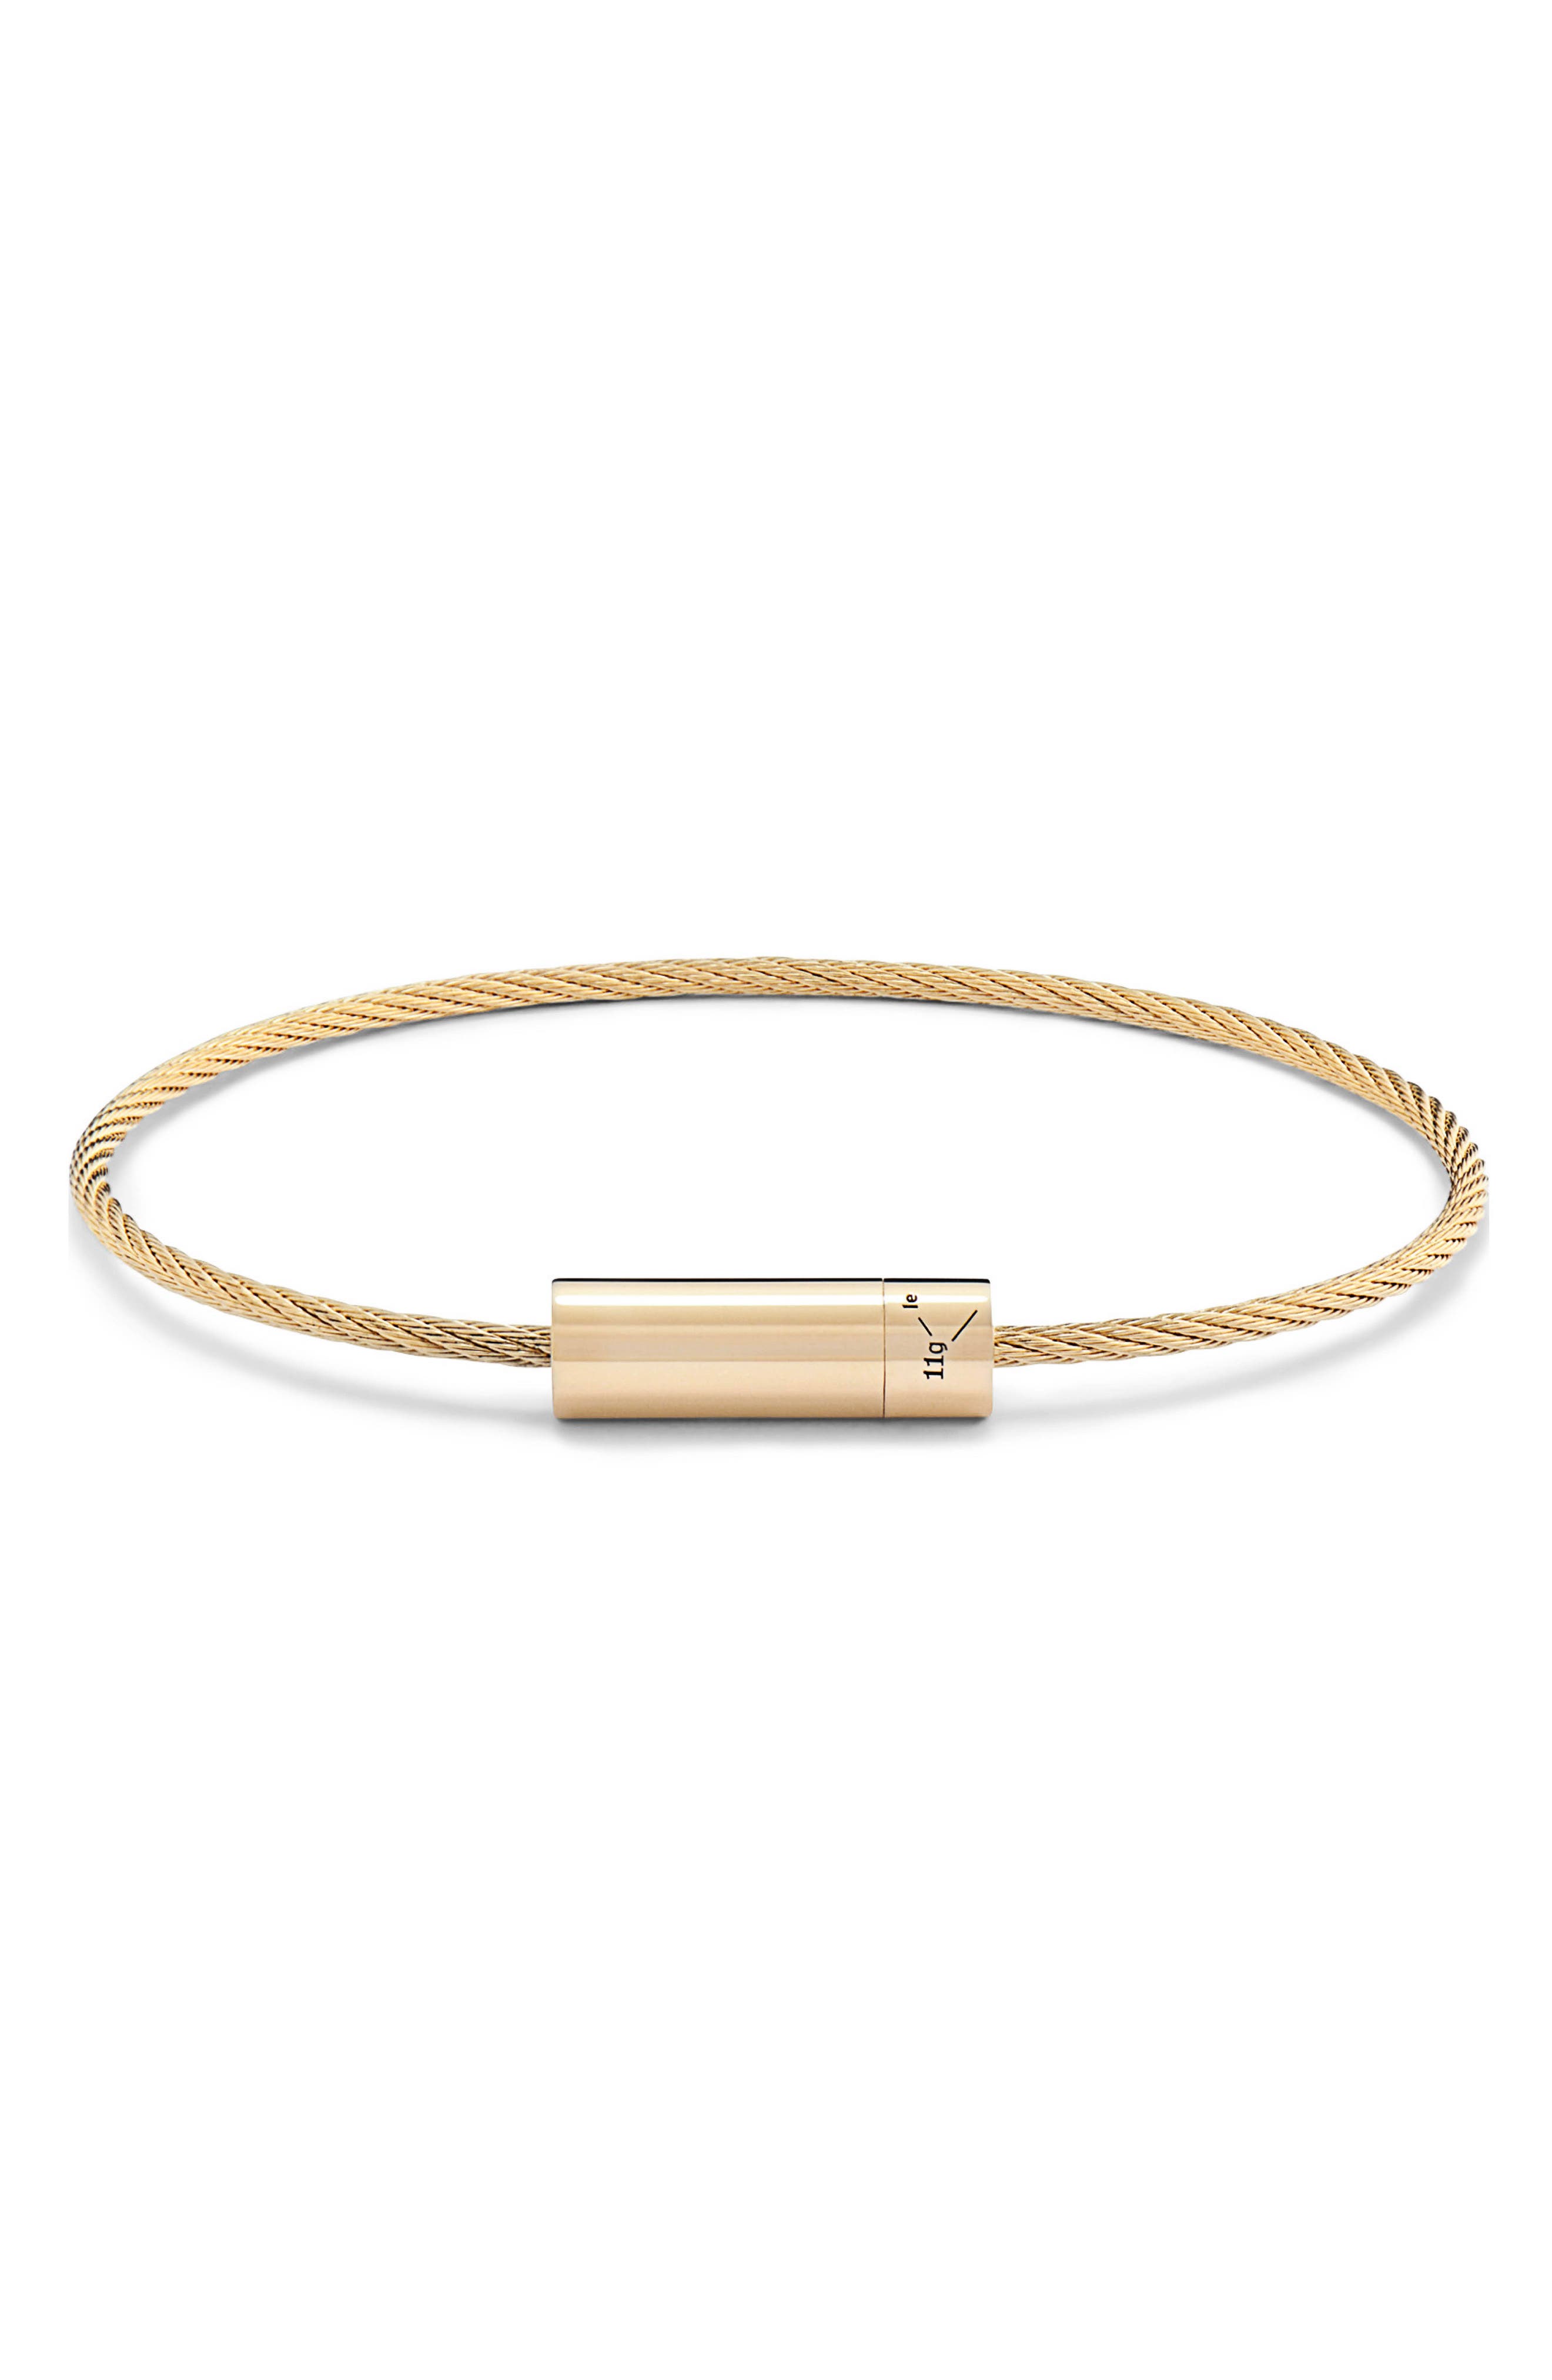 Le Gramme 18k Yellow Gold Le 15g Polished Cable Bracelet in Metallic for Men Mens Jewellery Bracelets 